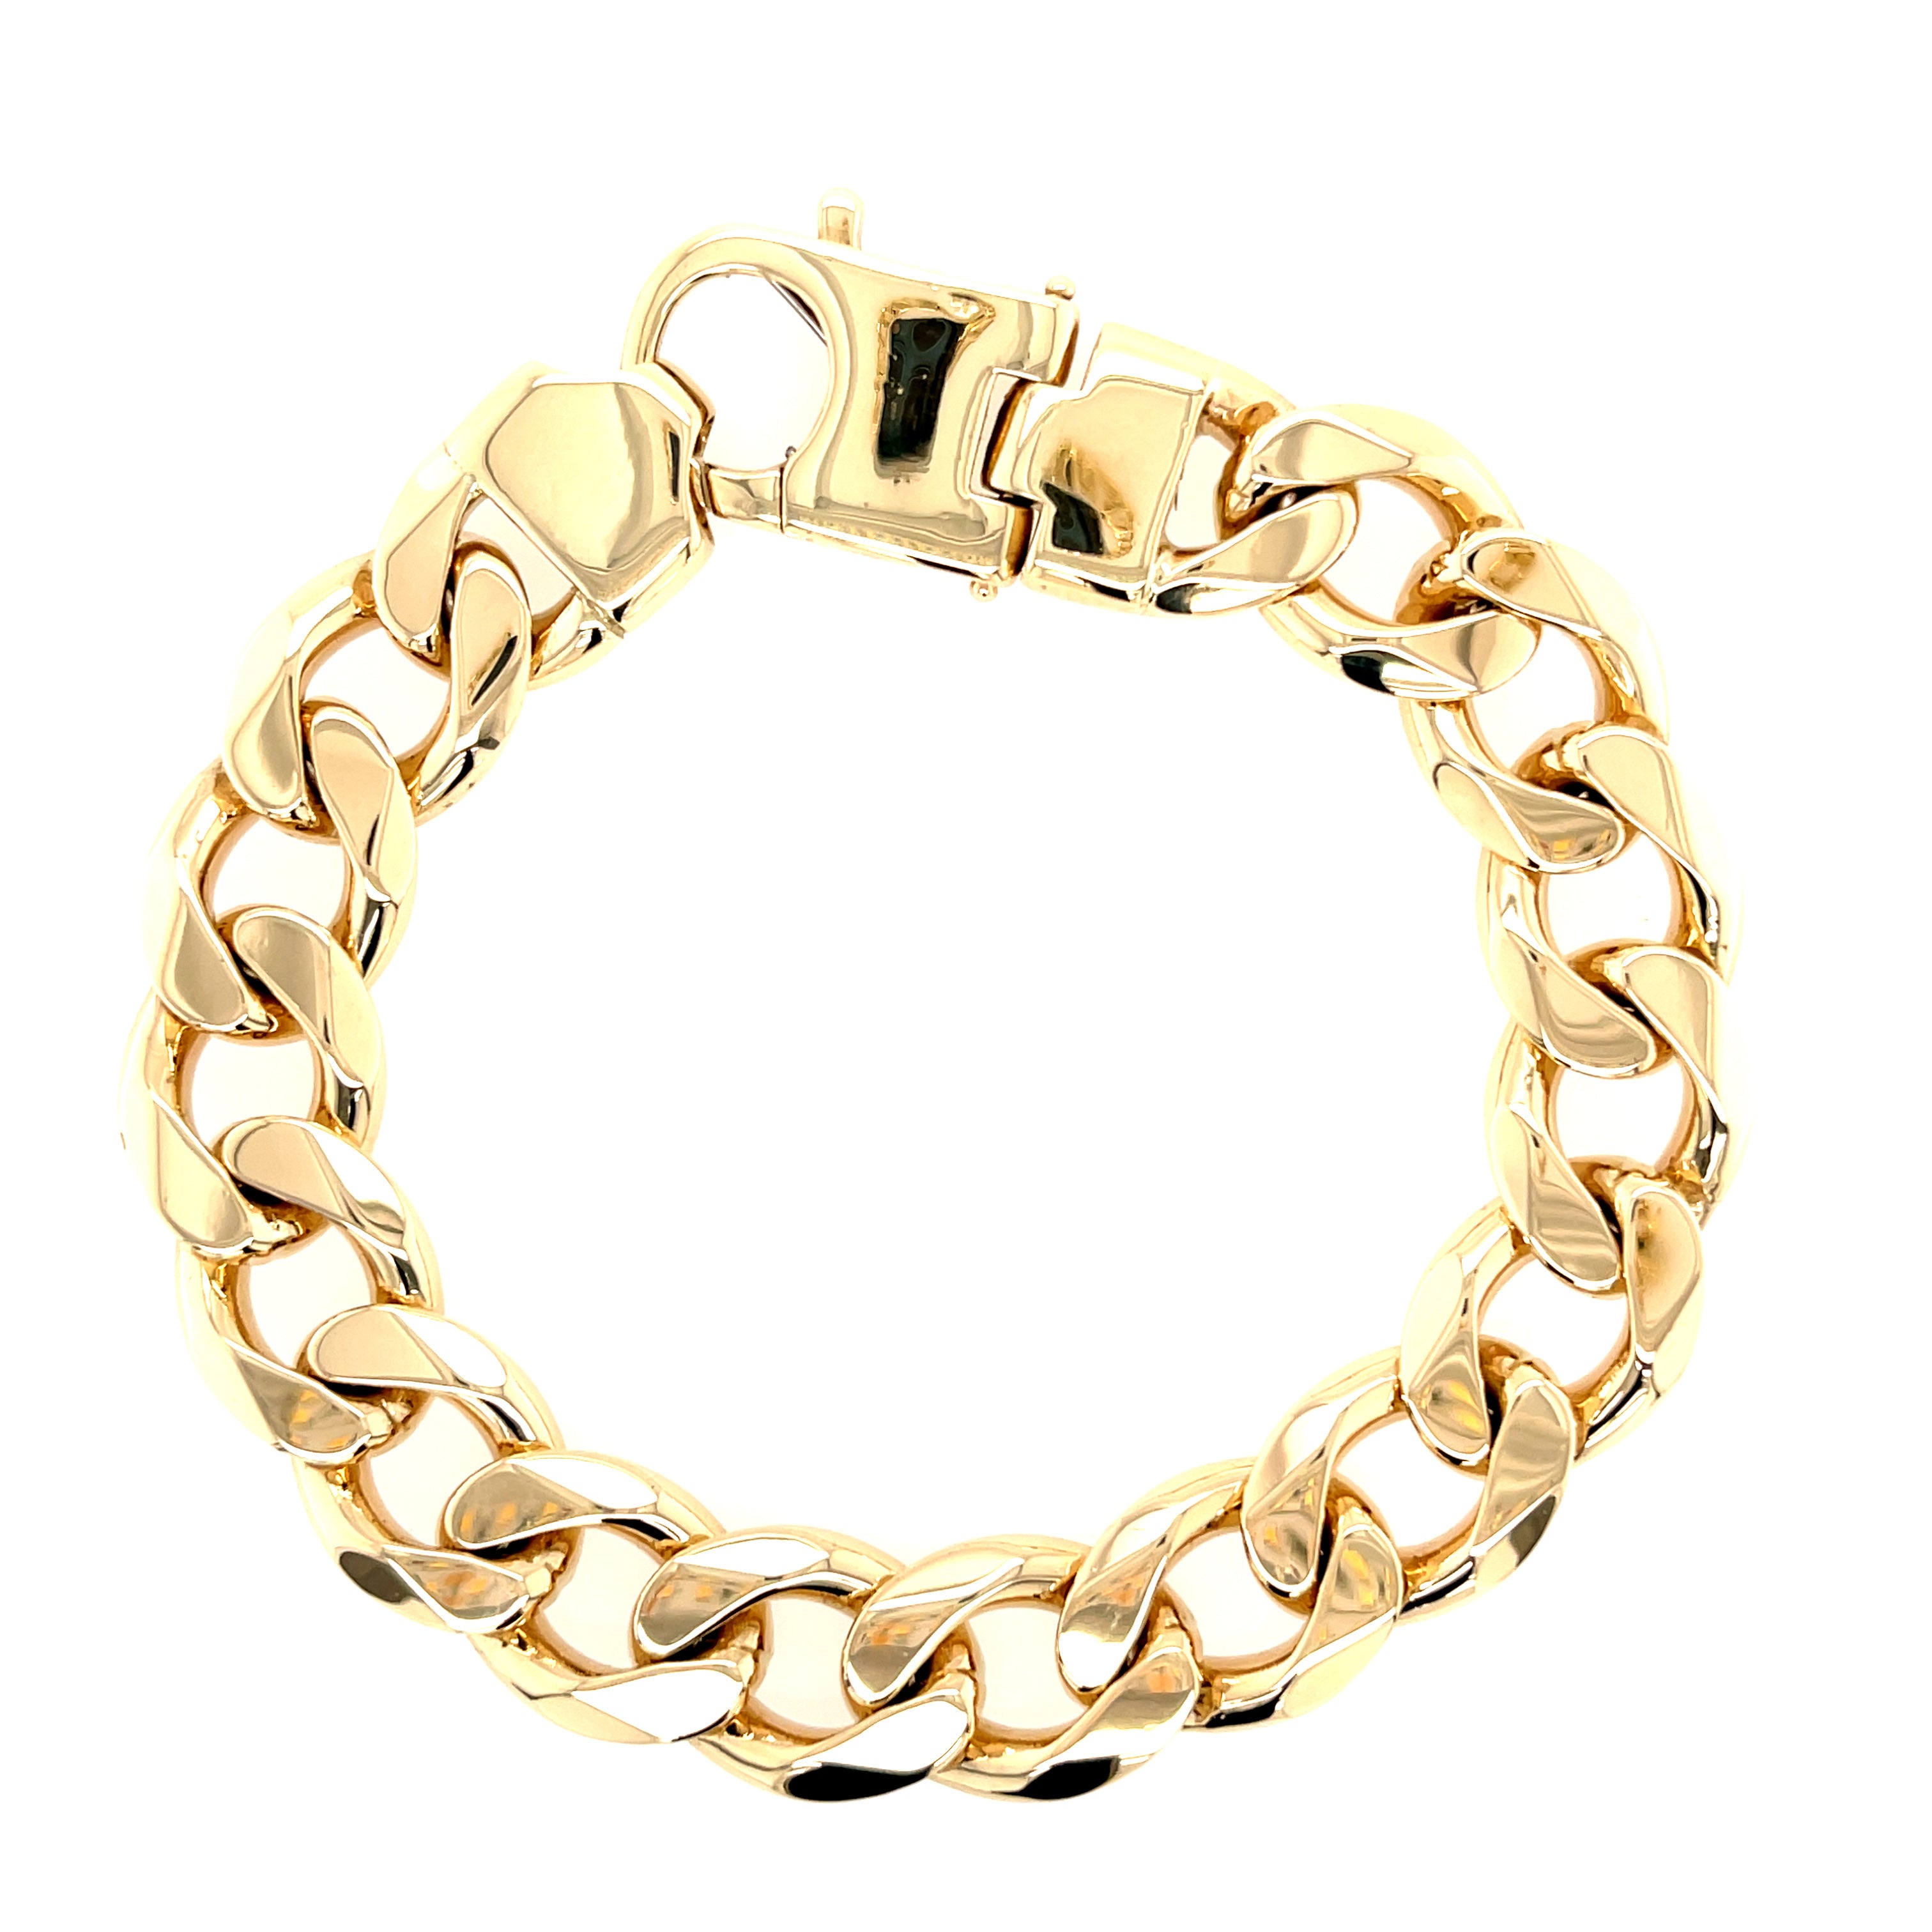 9ct Yellow Gold 9.25" Heavy Curb Link Bracelet - 91.60g